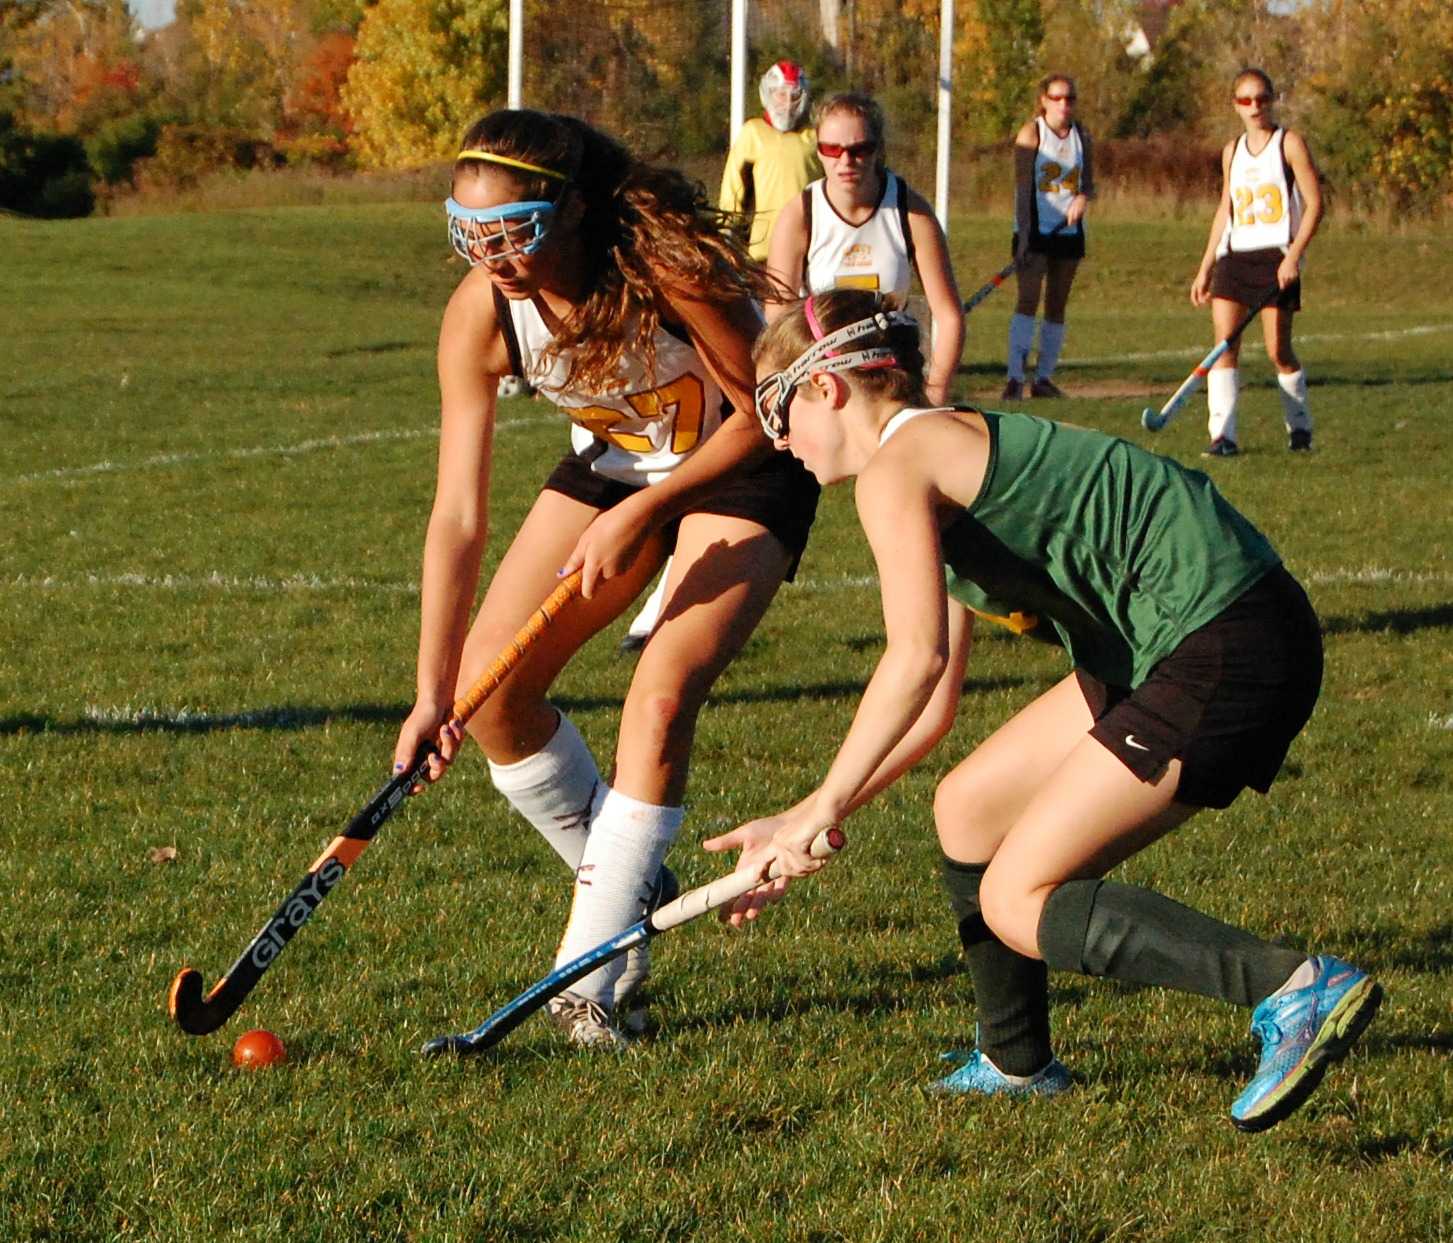 Junior, Maria Pulice, battles to get the ball away from Huron so they do not score a goal.